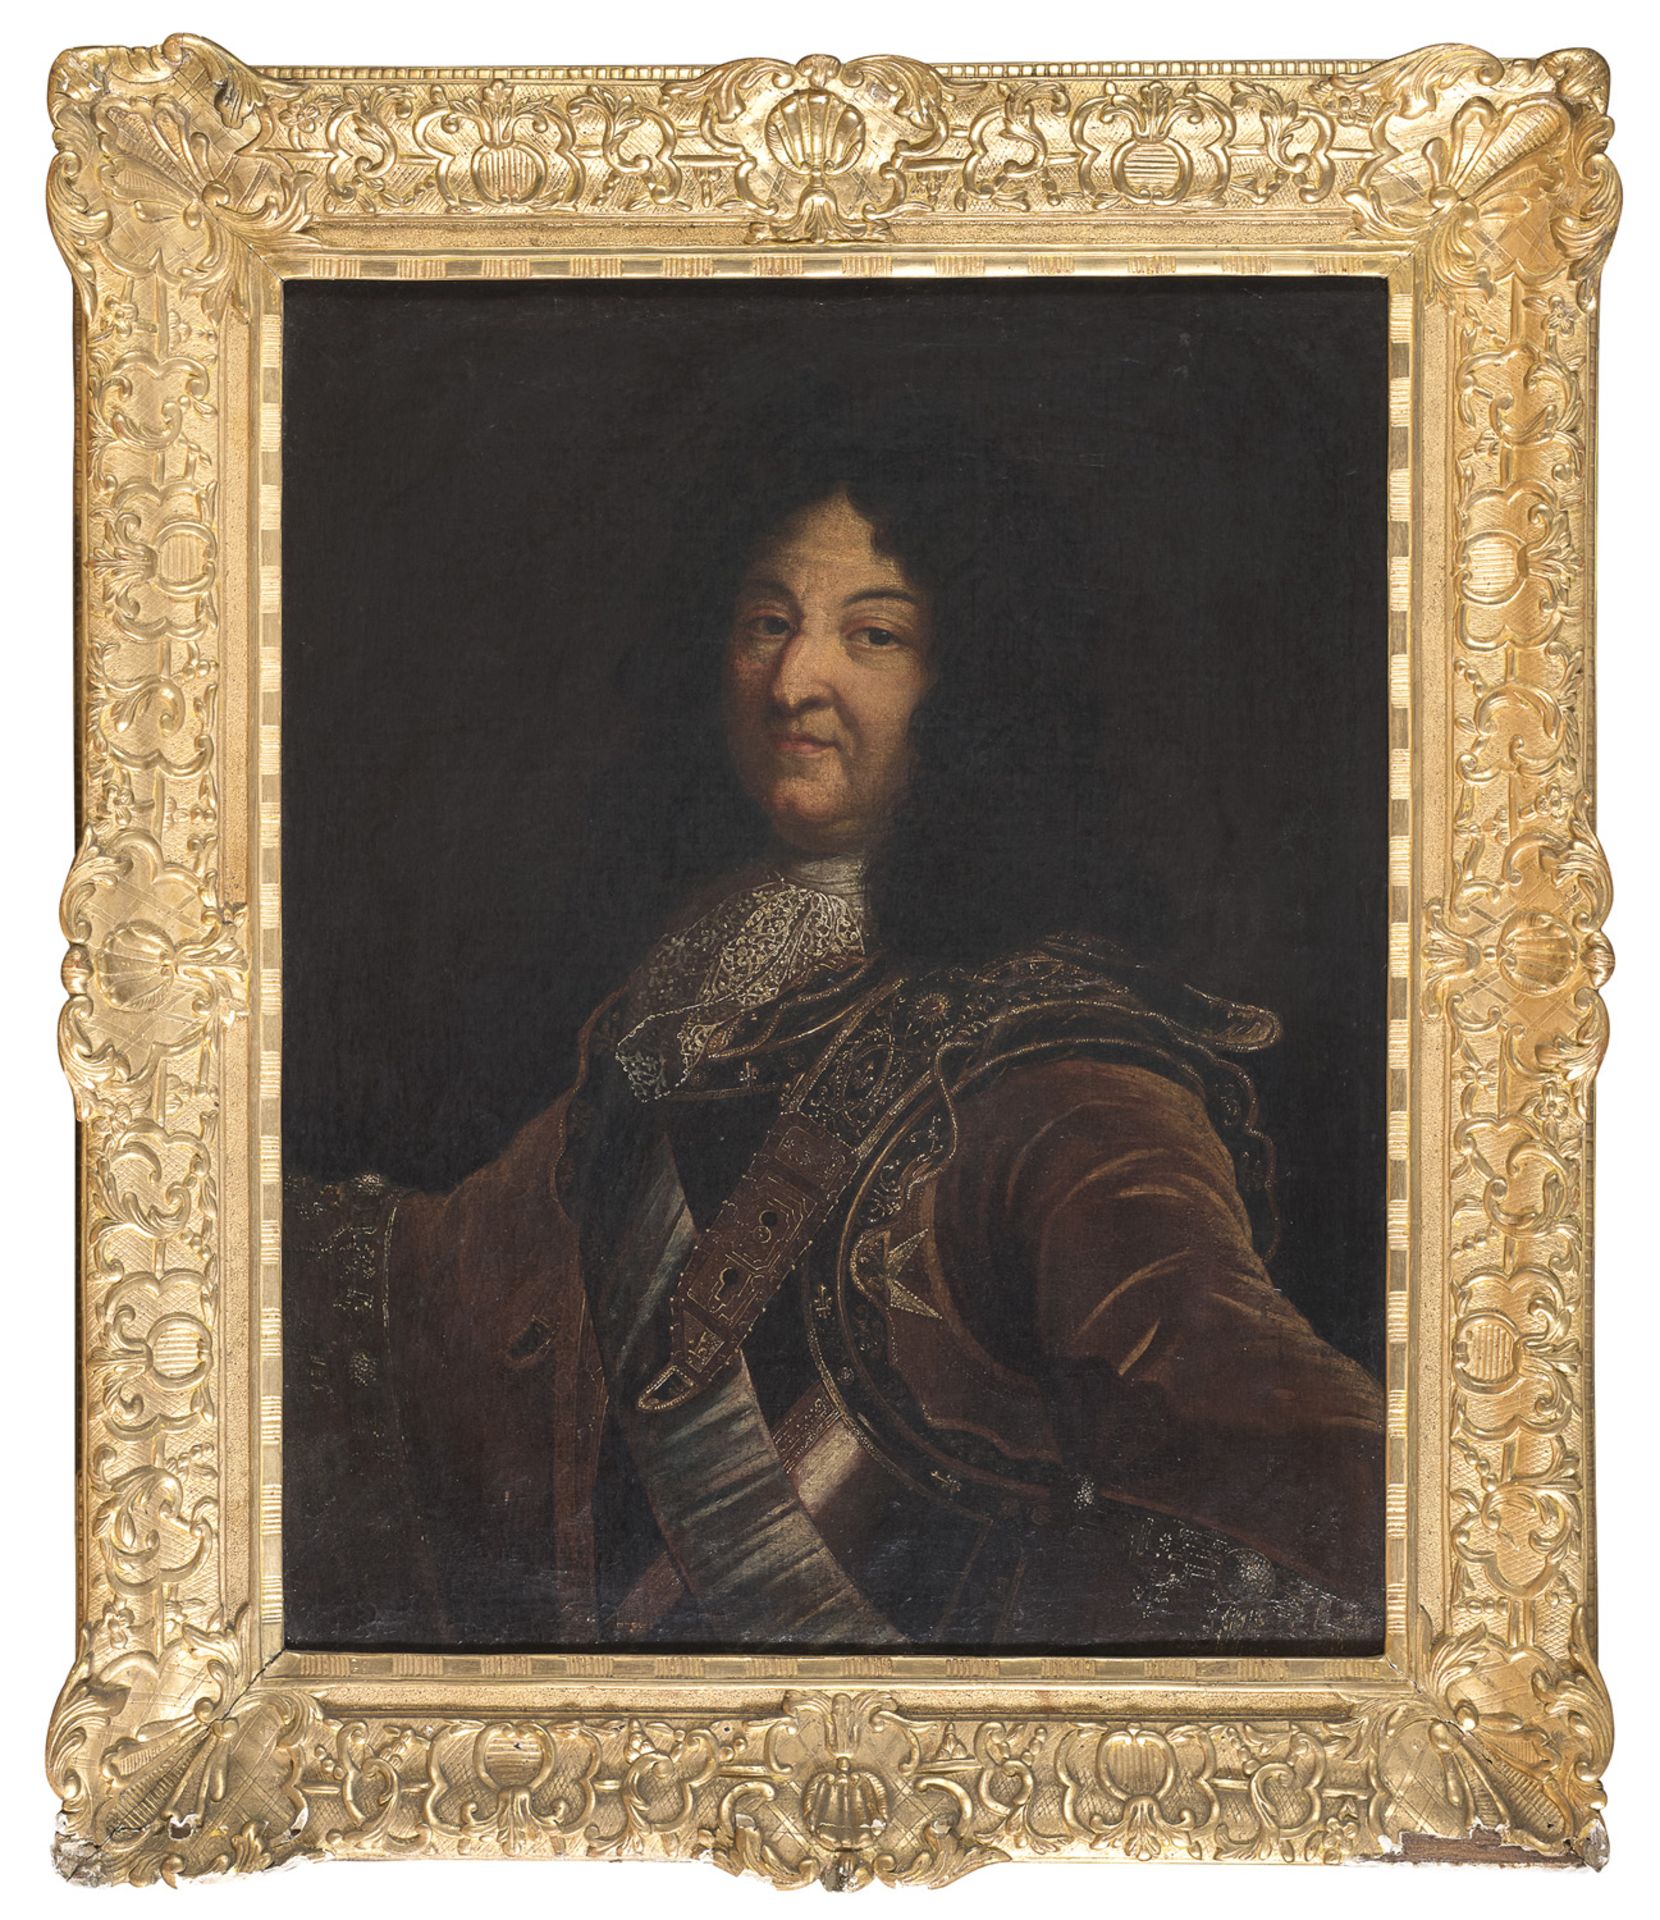 OIL PORTRAIT OF LOUIS XIV BY FOLLOWER OF HYACINTHE RIGAUD (1659-1743)